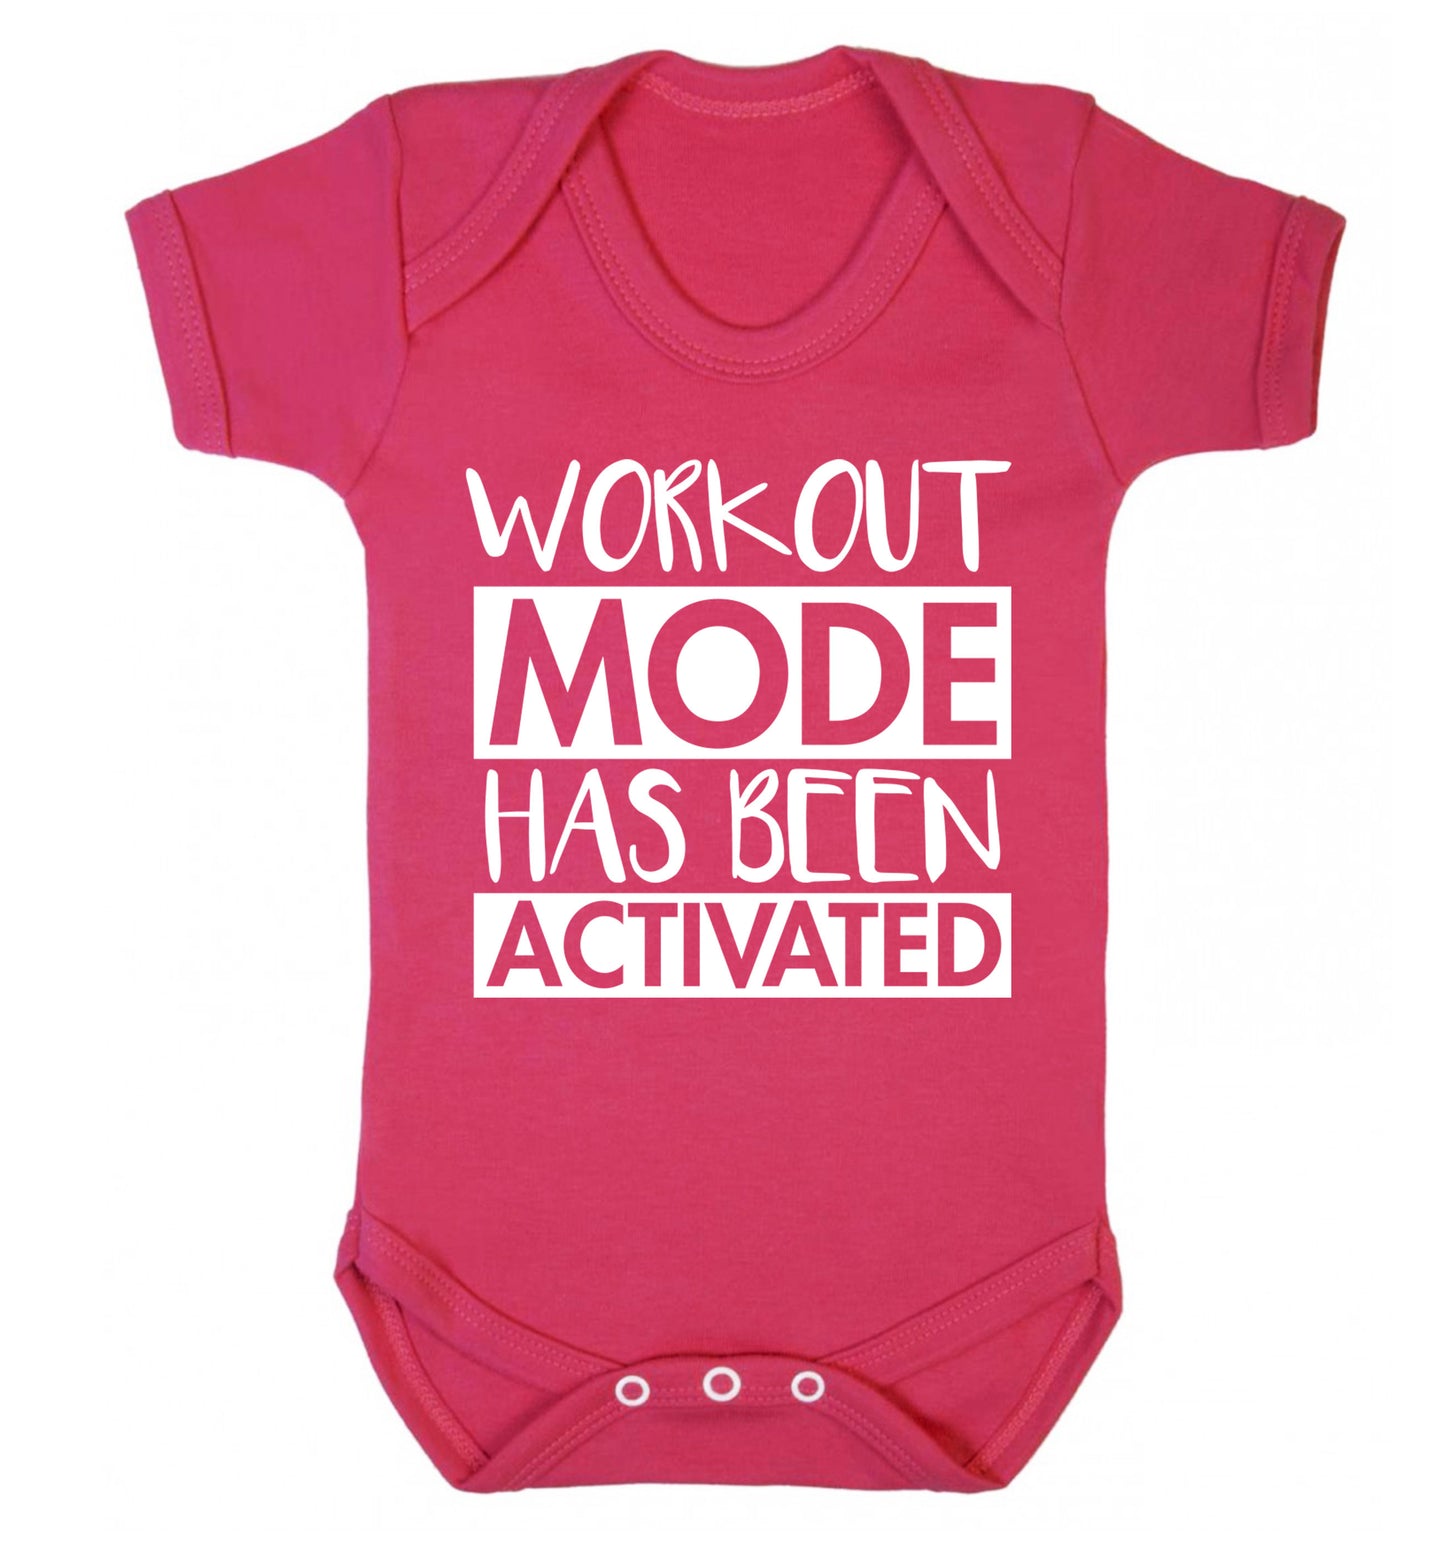 Workout mode has been activated Baby Vest dark pink 18-24 months